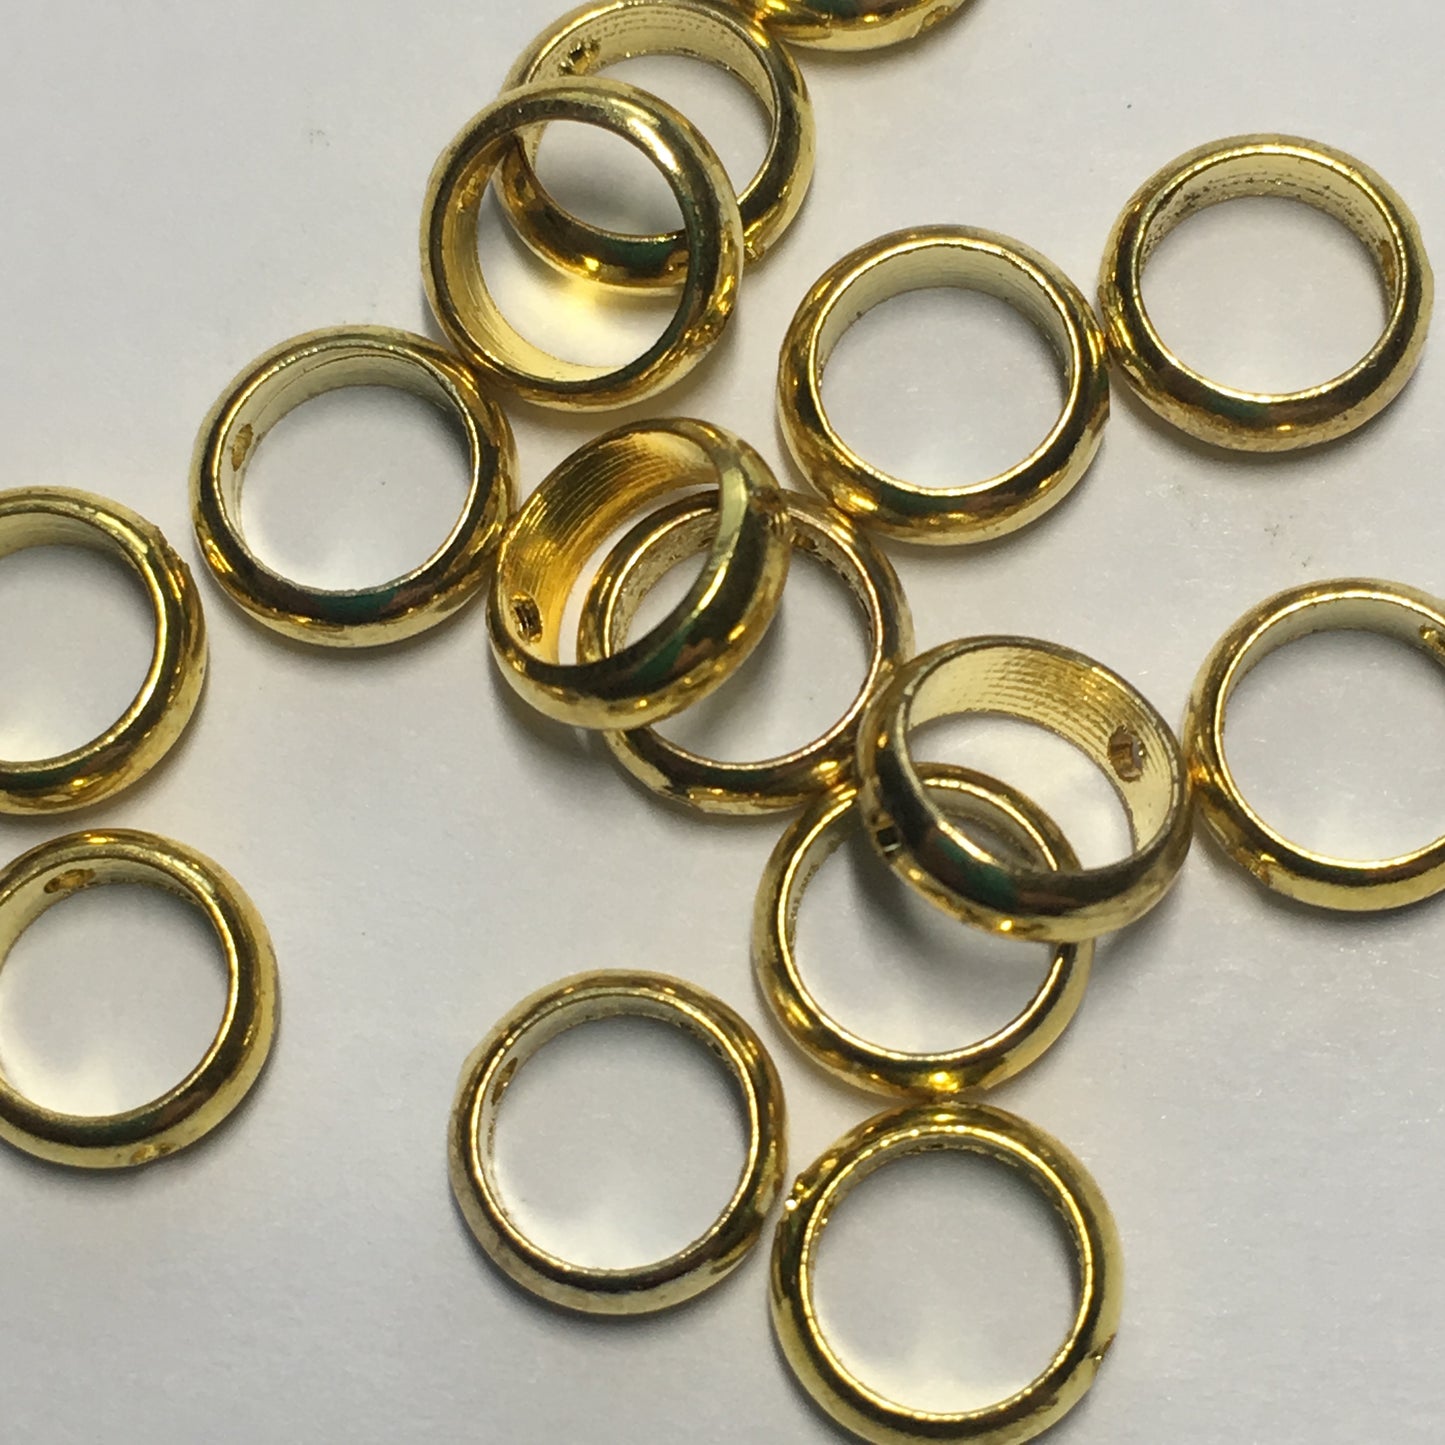 Gold Rings Spacers Connectors Beads, 8 x 2 mm, Quantity 14